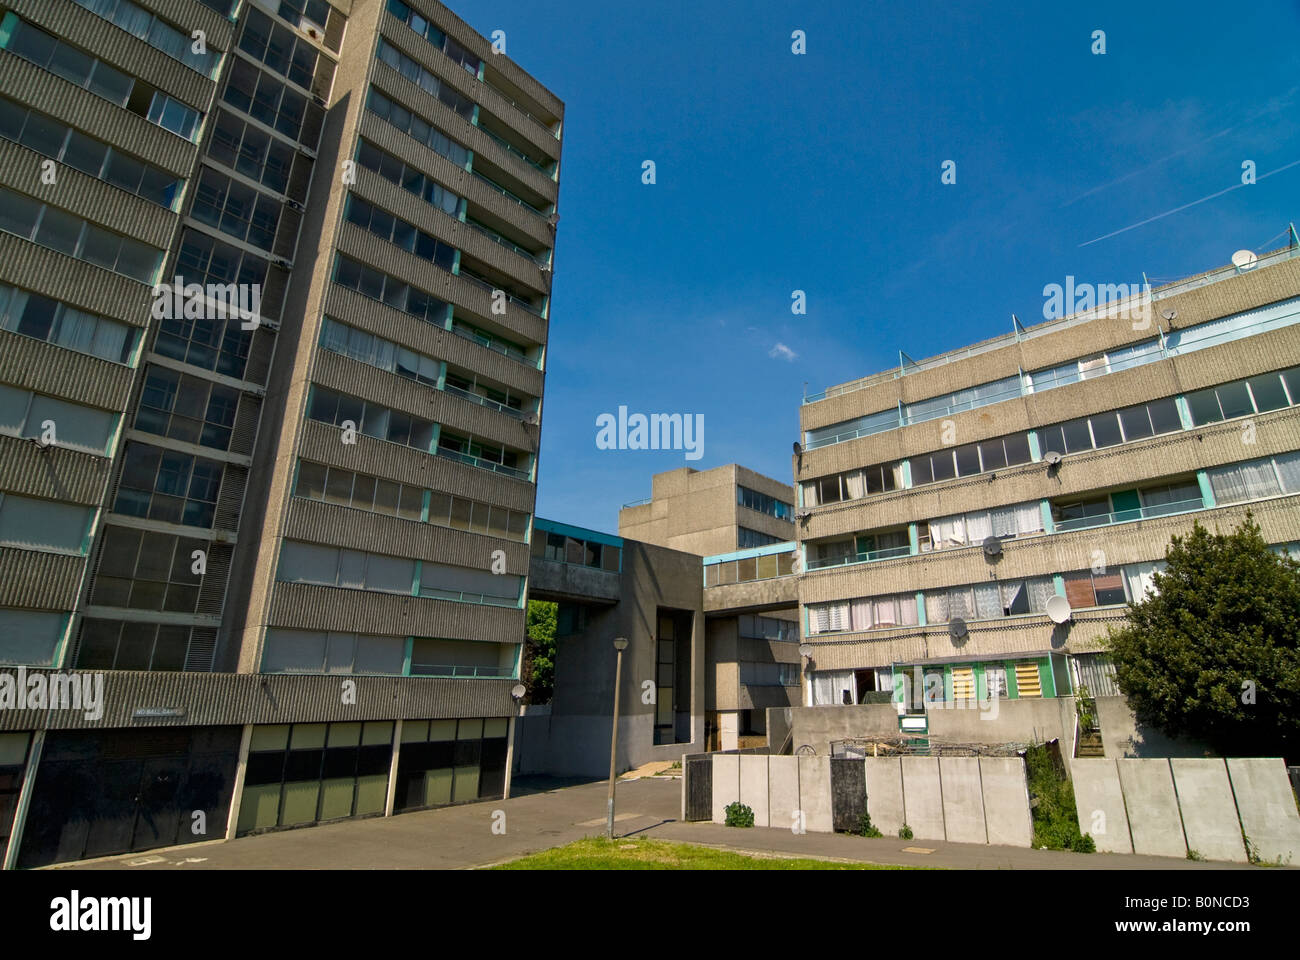 Horizontal wide angle of an empty tower block on the Ferrier Estate in Kidbrooke Park on a bright sunny day Stock Photo